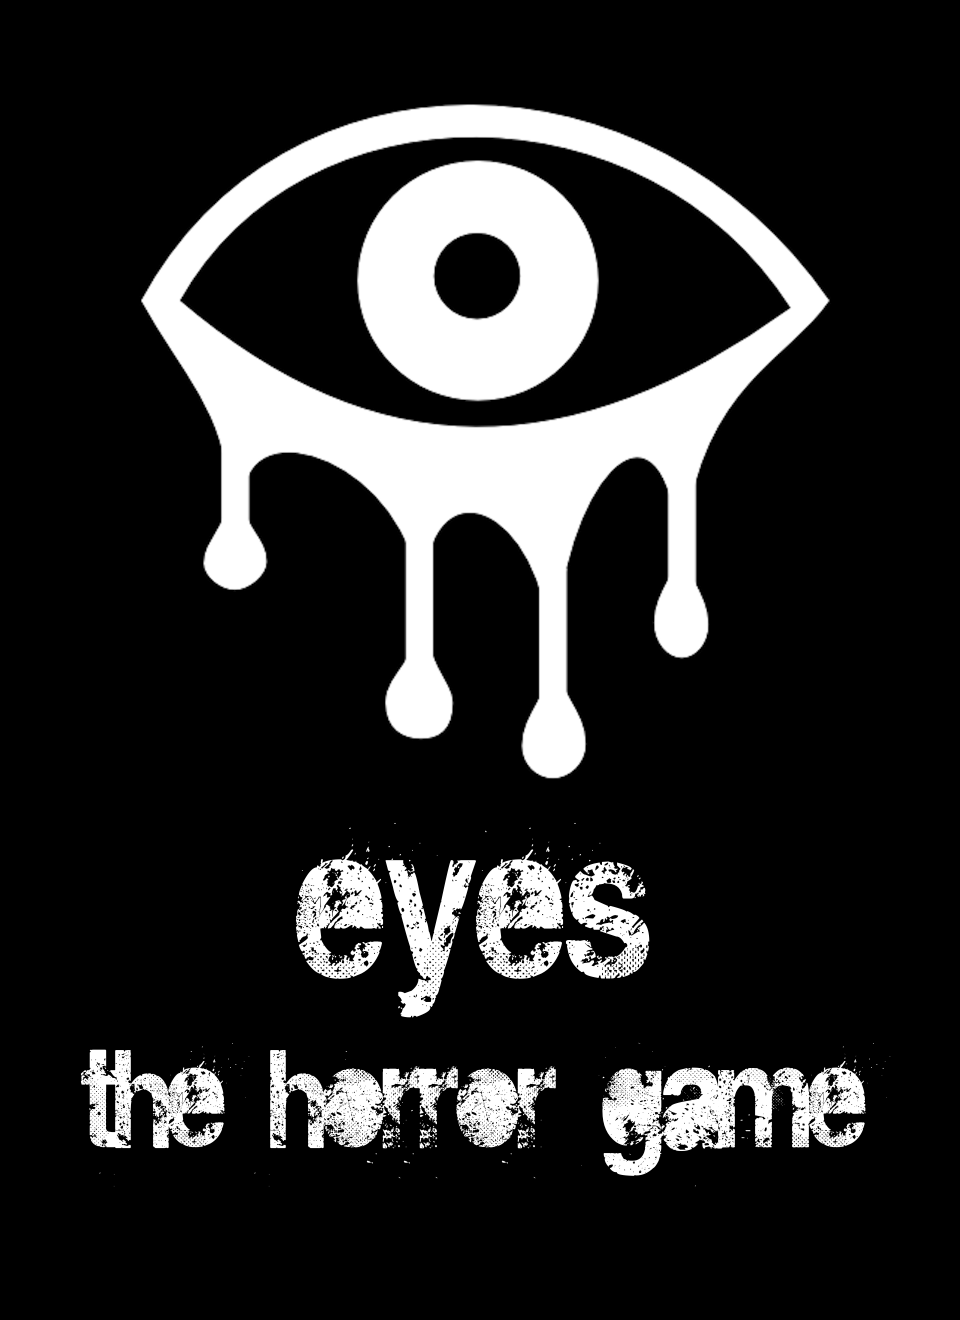 Eyes - The Horror Game - 🔽 Free Download